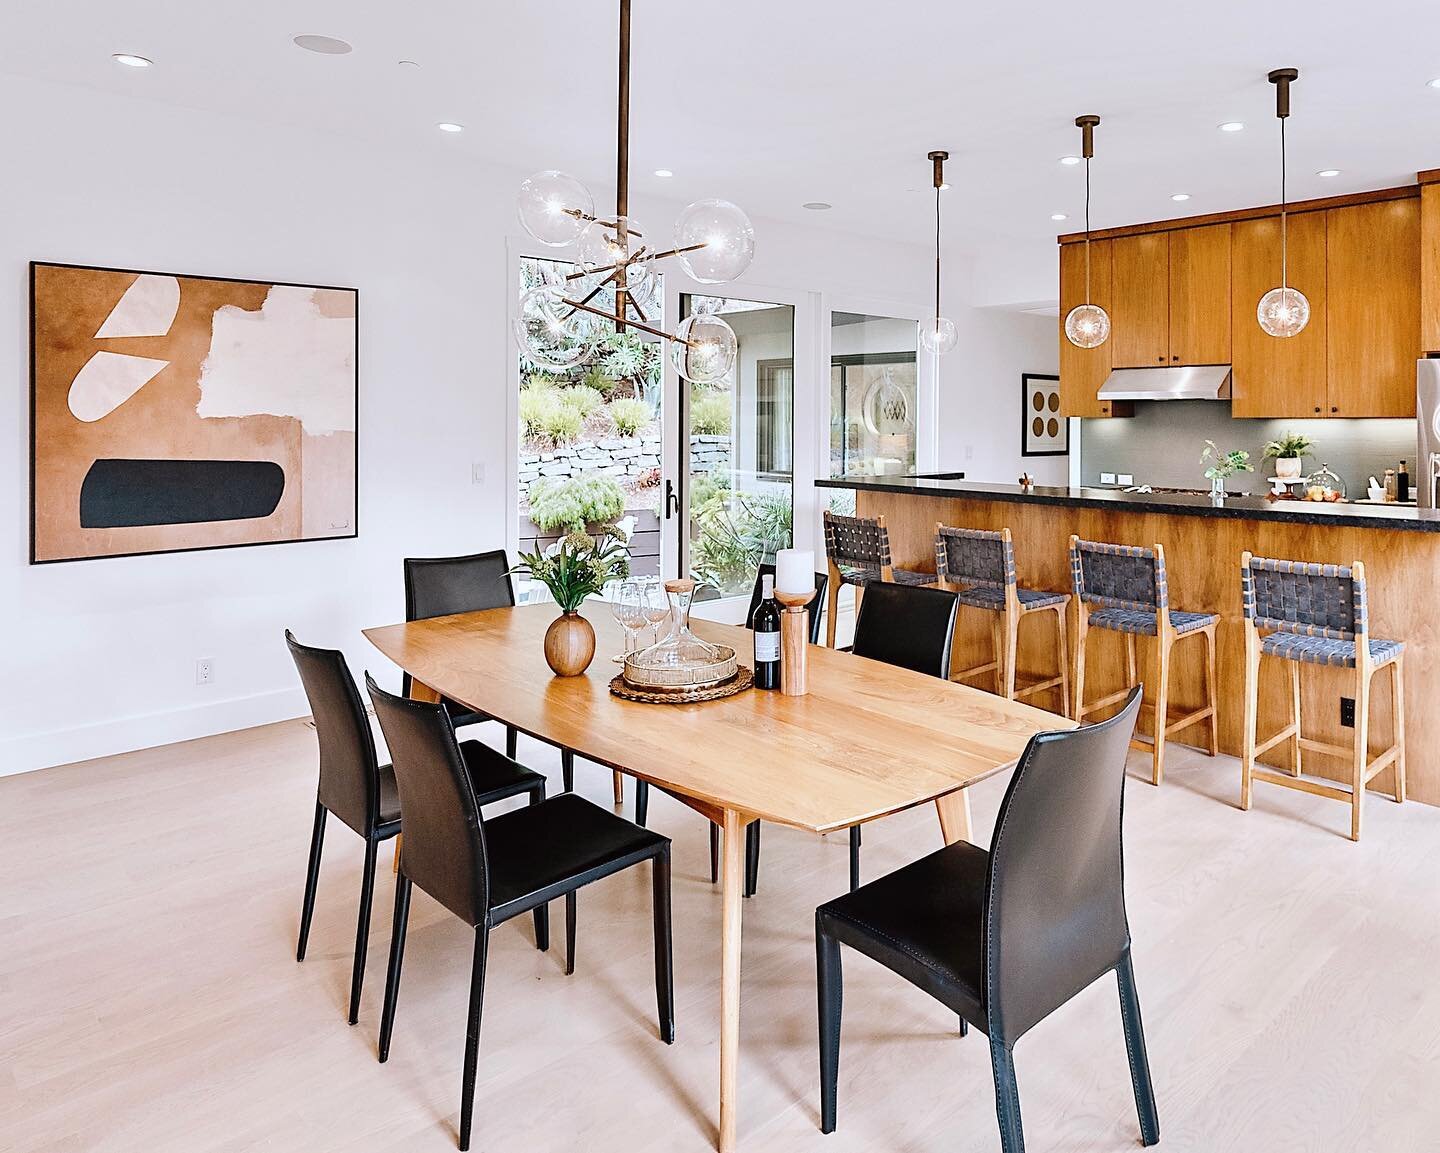 Staged to perfection. The natural elements found in the interior design enhance the home&rsquo;s warm wood tones and stylish fixtures. 

To say we are in love with this listing would be an understatement! 🤩

Mill Valley, California 
4 bed, 3.5 Bath,